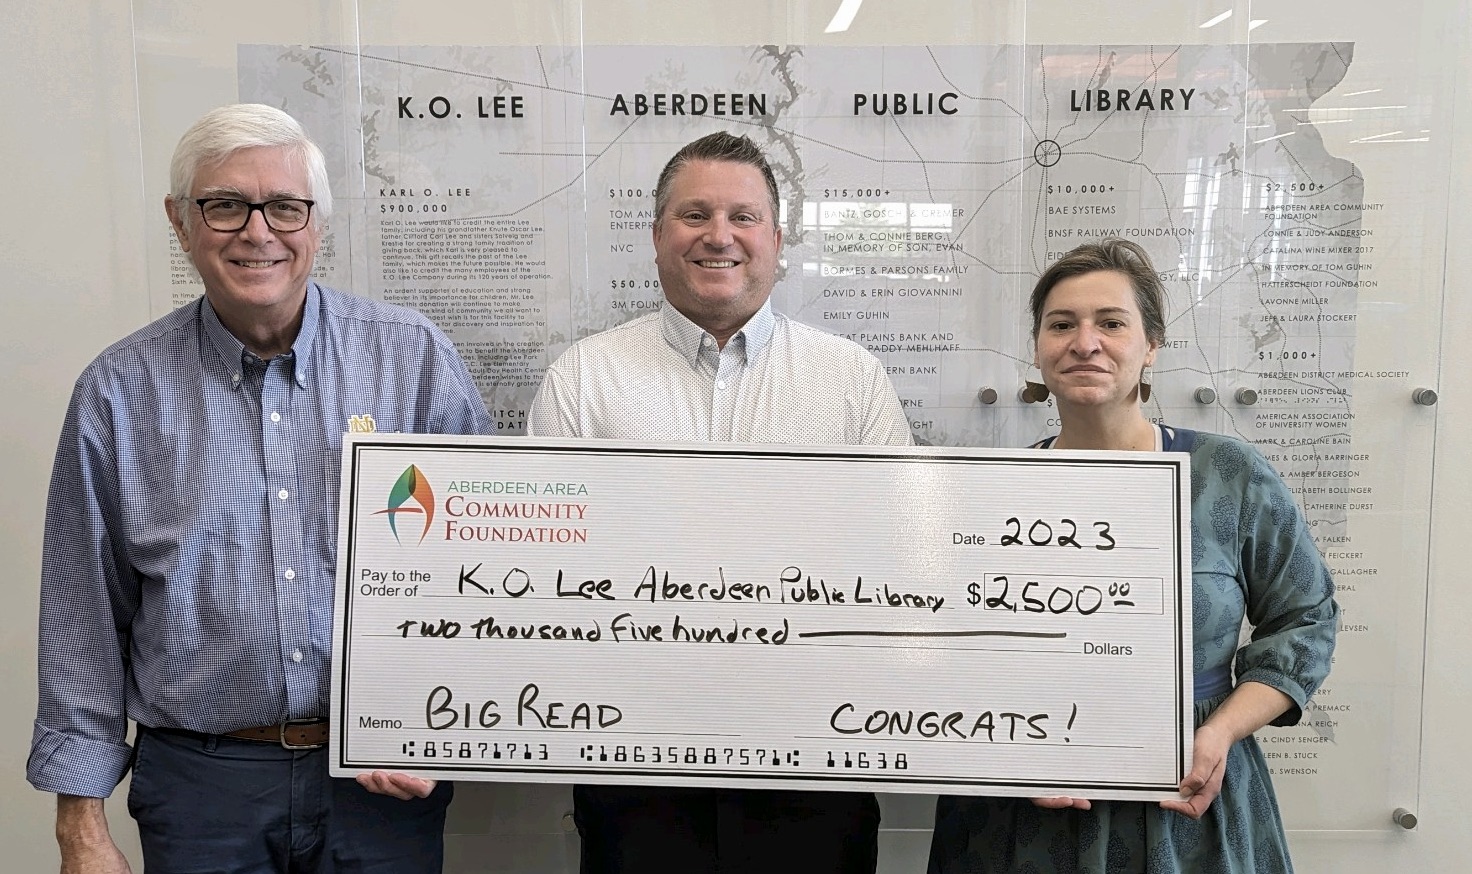 K.O. Lee Aberdeen Public Library received $2,500 to support its Big Read project, which will run from fall 2023 to spring 2024. Pictured, from left, are Patrick Gallagher, Aberdeen Area Community Foundation executive director; Heath Johnson, Aberdeen Area Community Foundation chairman; and Anna Moser, K.O. Lee Aberdeen Public Library director. Courtesy photo